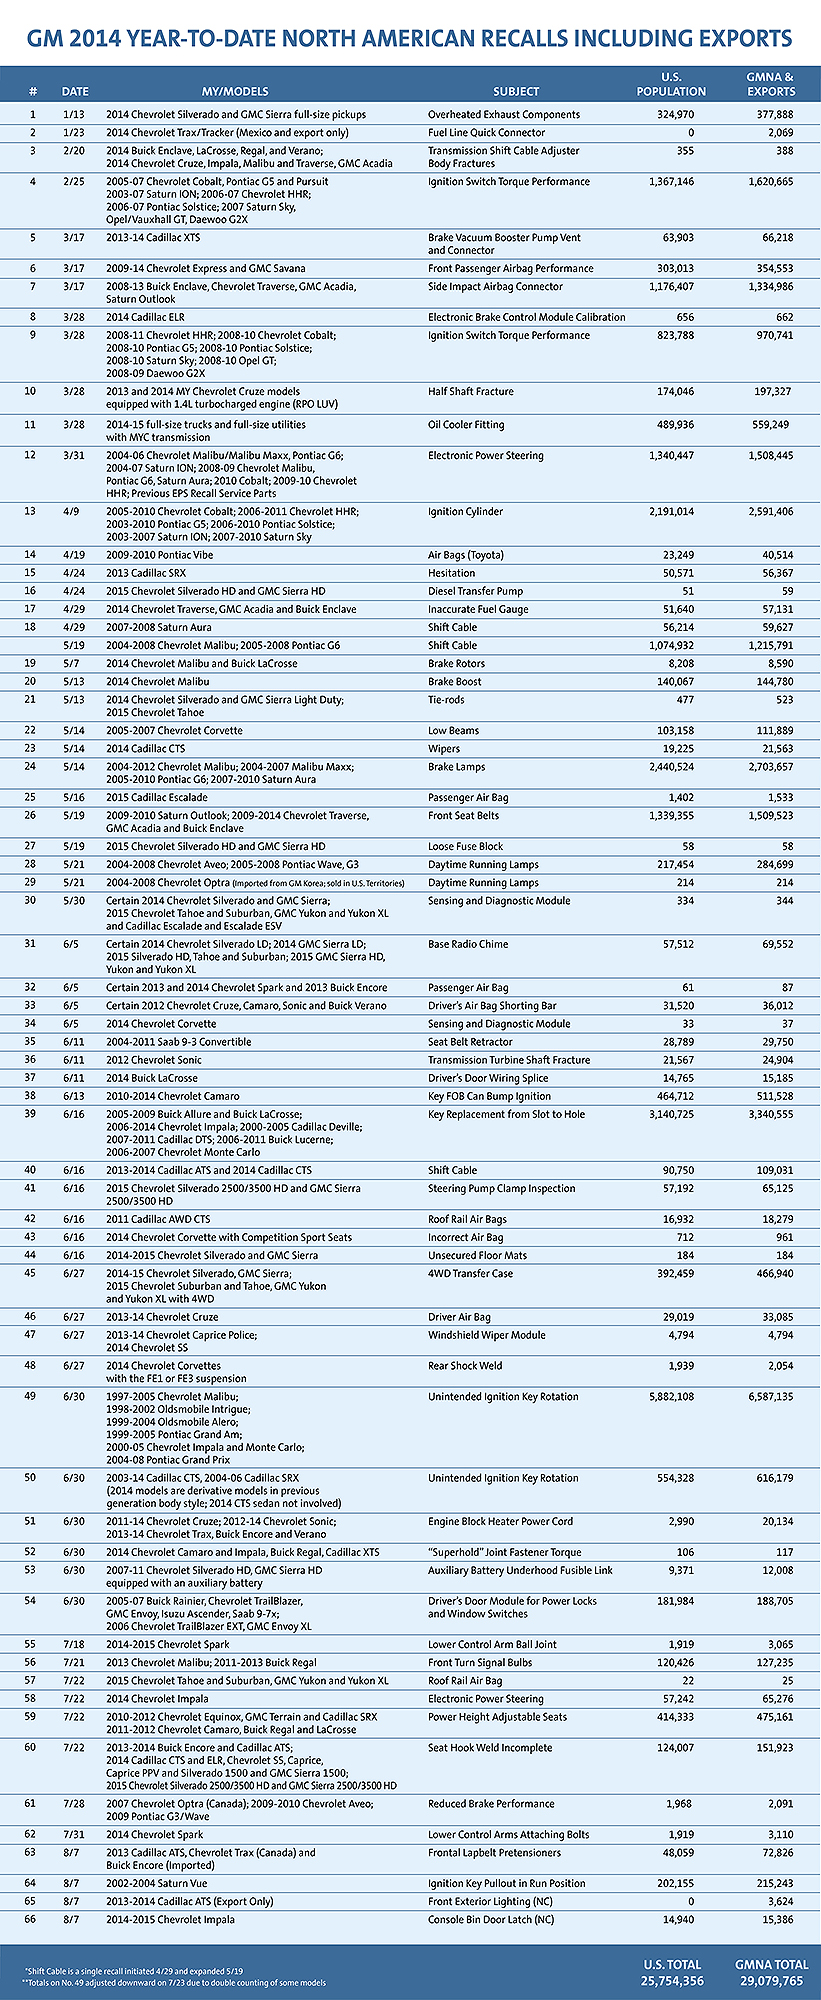 2014 GM recalls (as of August 8)